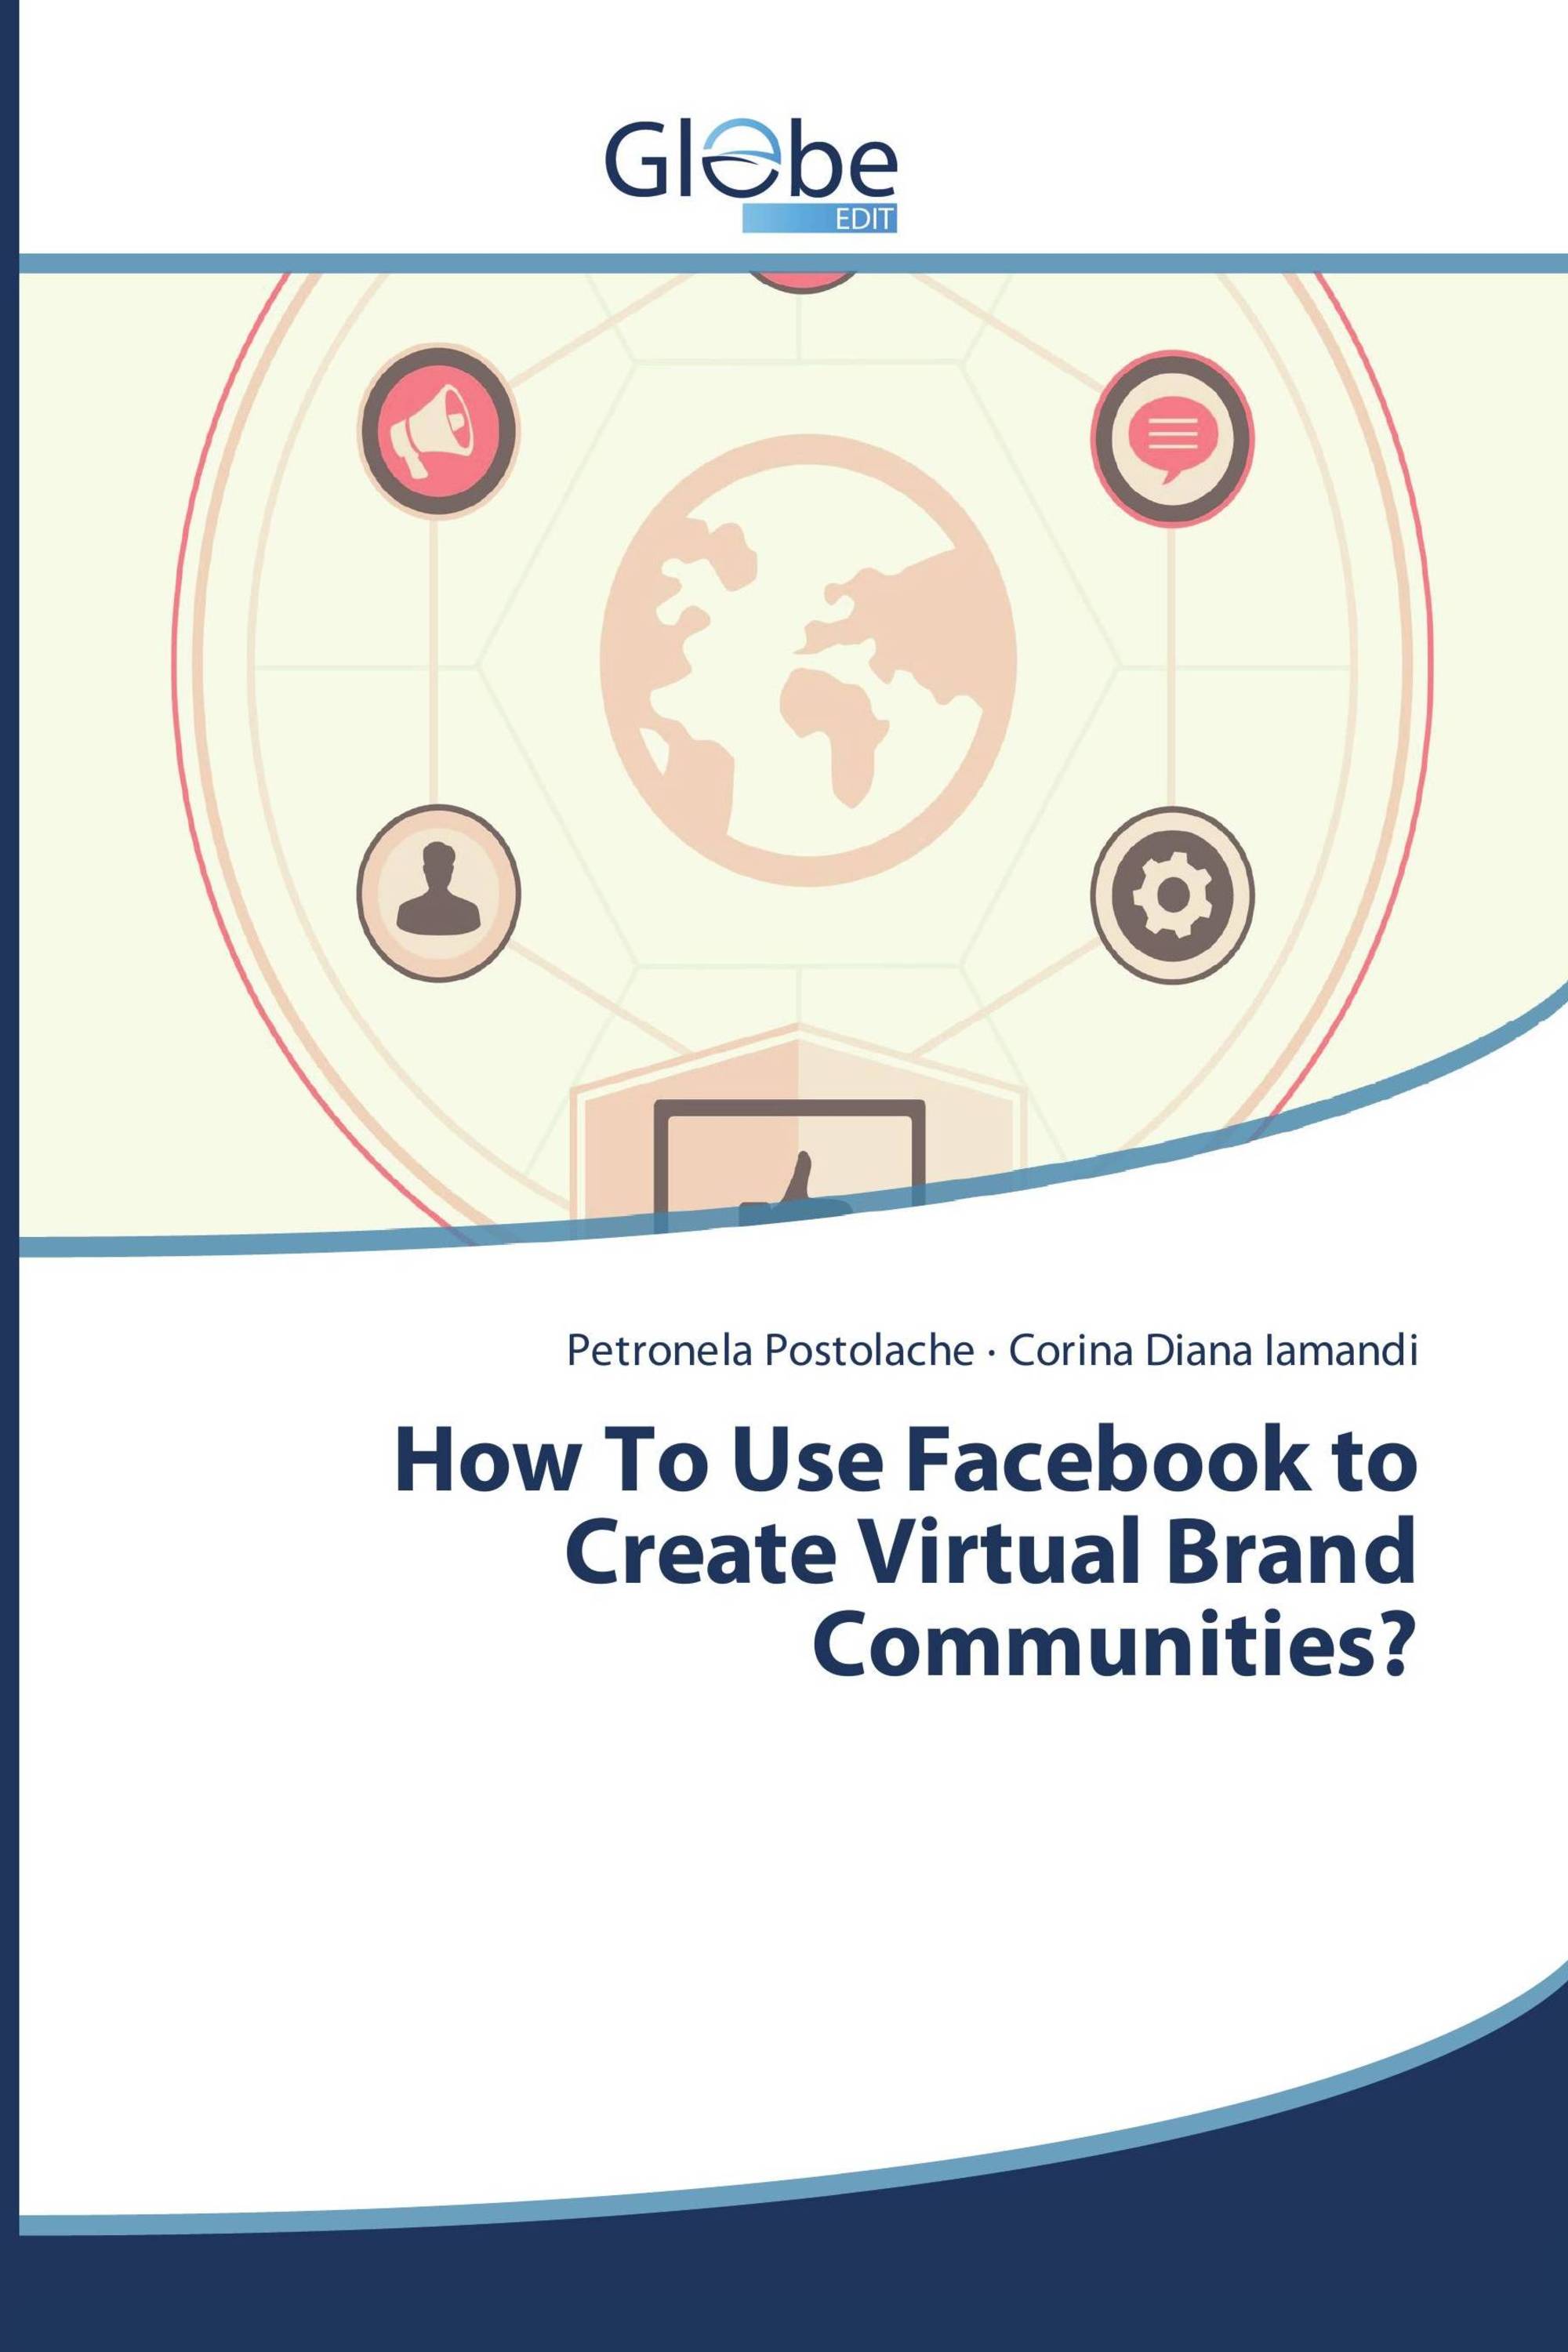 How To Use Facebook to Create Virtual Brand Communities?